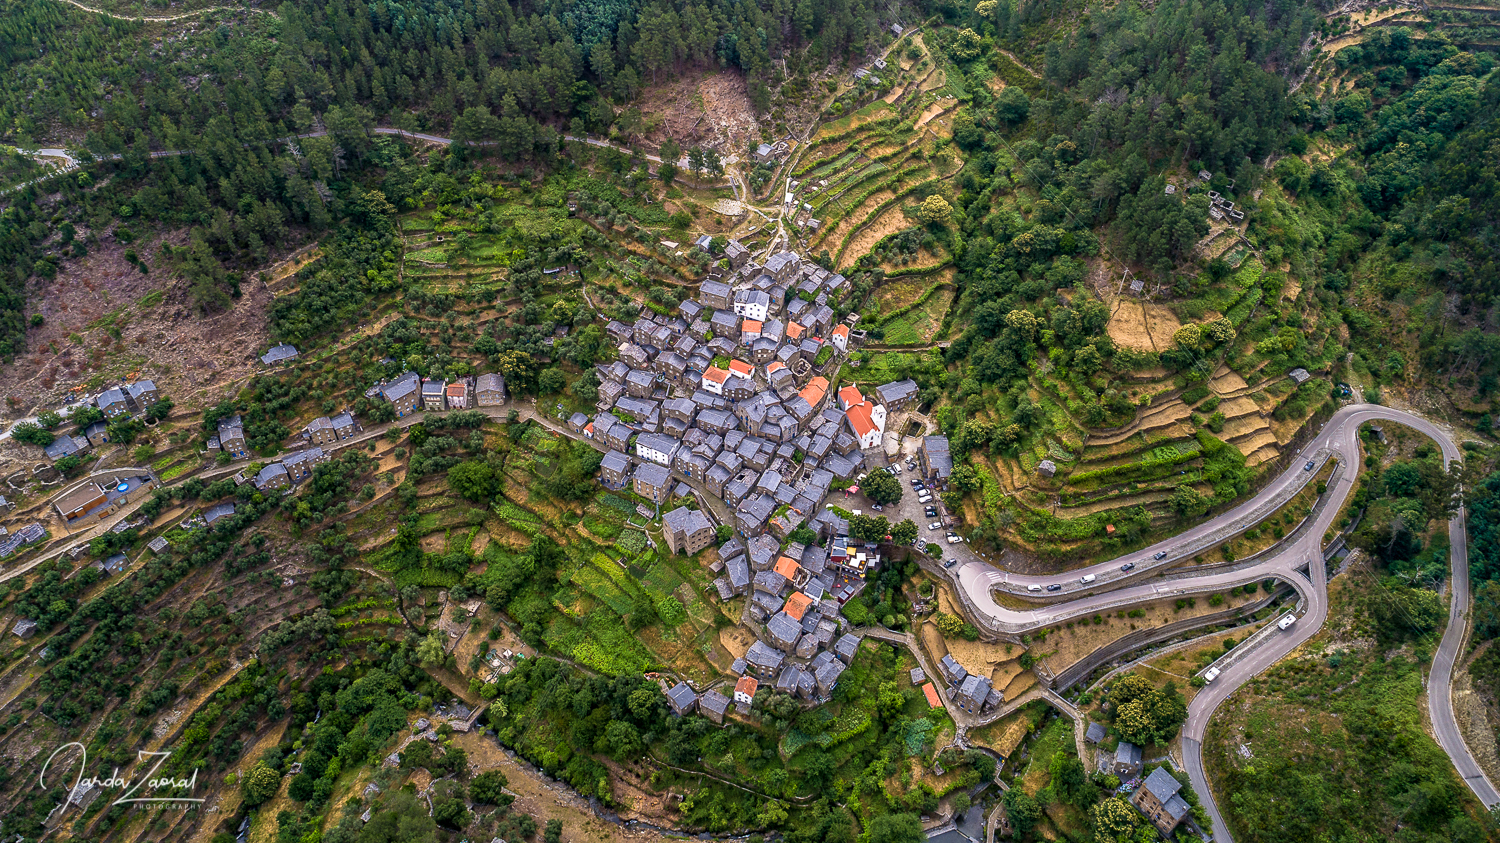 Aerial image of an amazing hidden gem of Portugal - the village Piodao